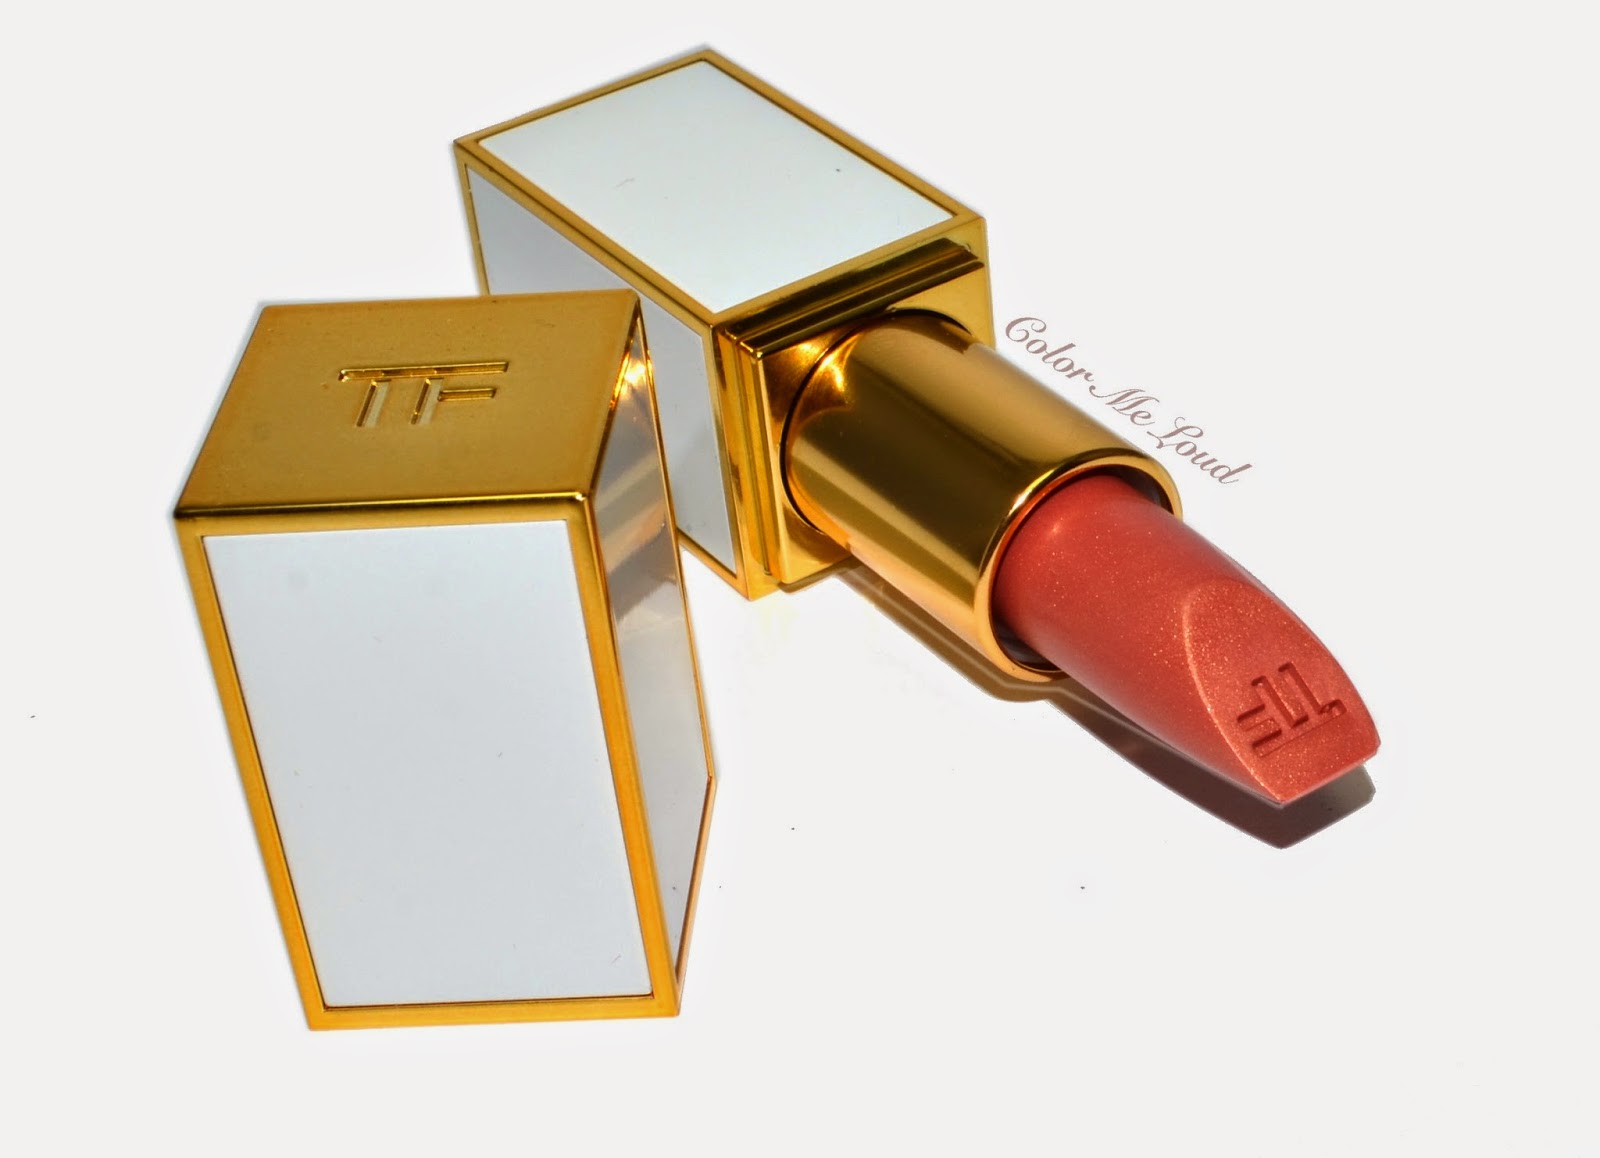 Tom Ford Lip Color Sheer in Skinny Dip, Review, Swatch & FOTD with Spring Colors